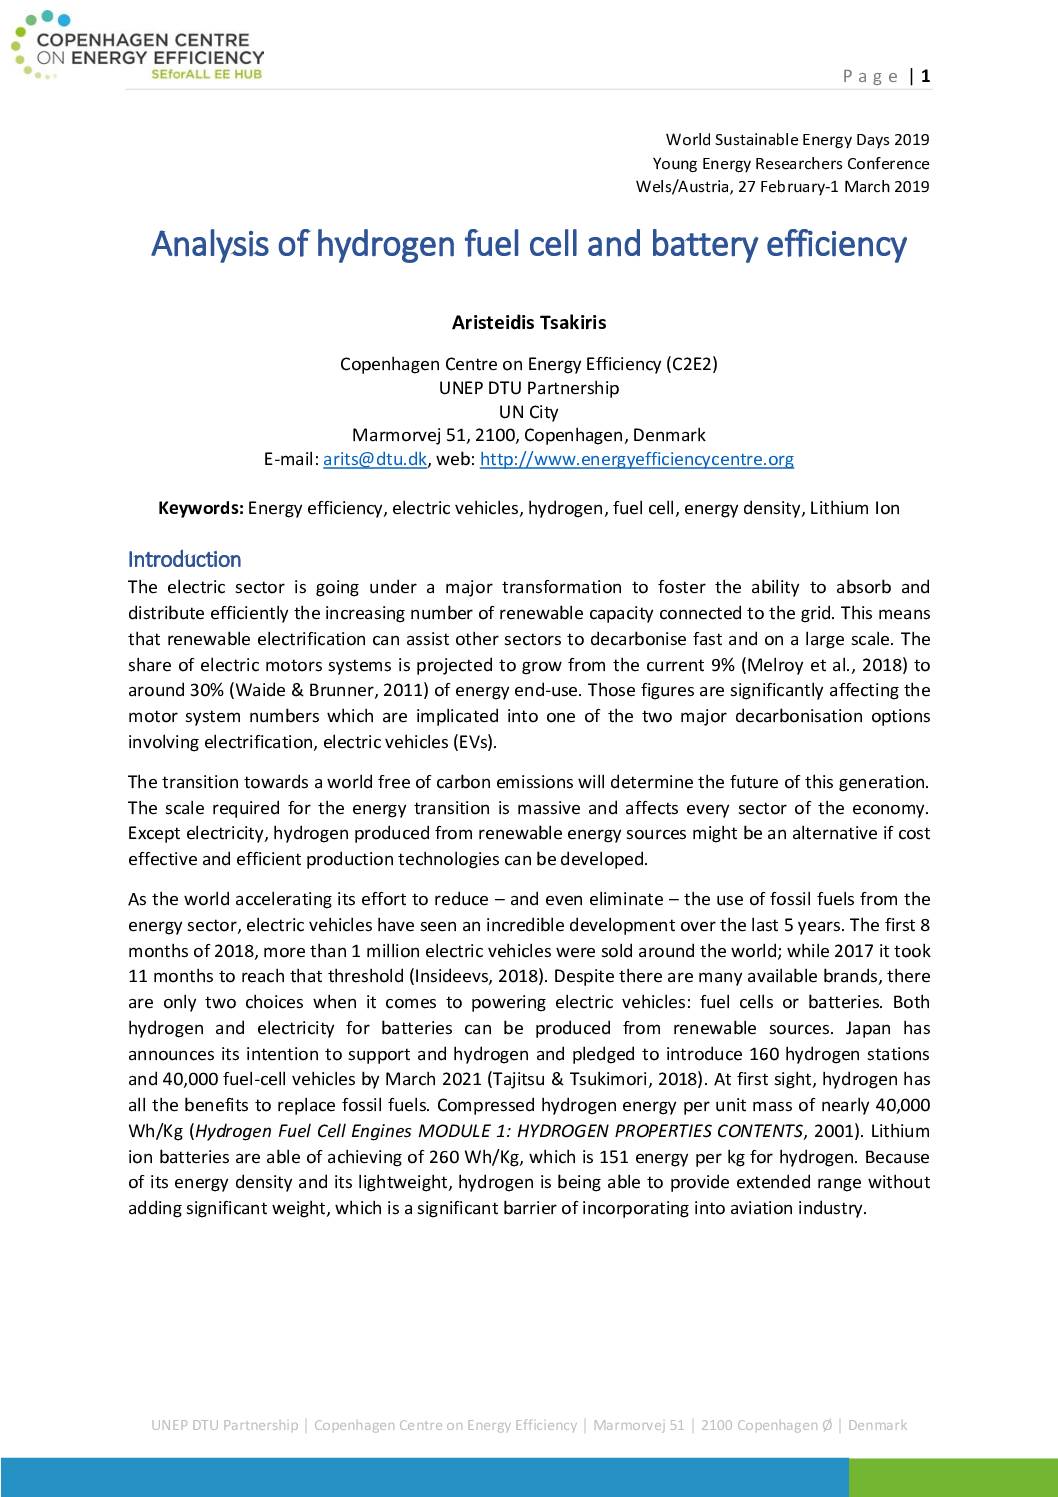 Analysis of hydrogen fuel cell and battery efficiency (Presentation) – 27.02.2019